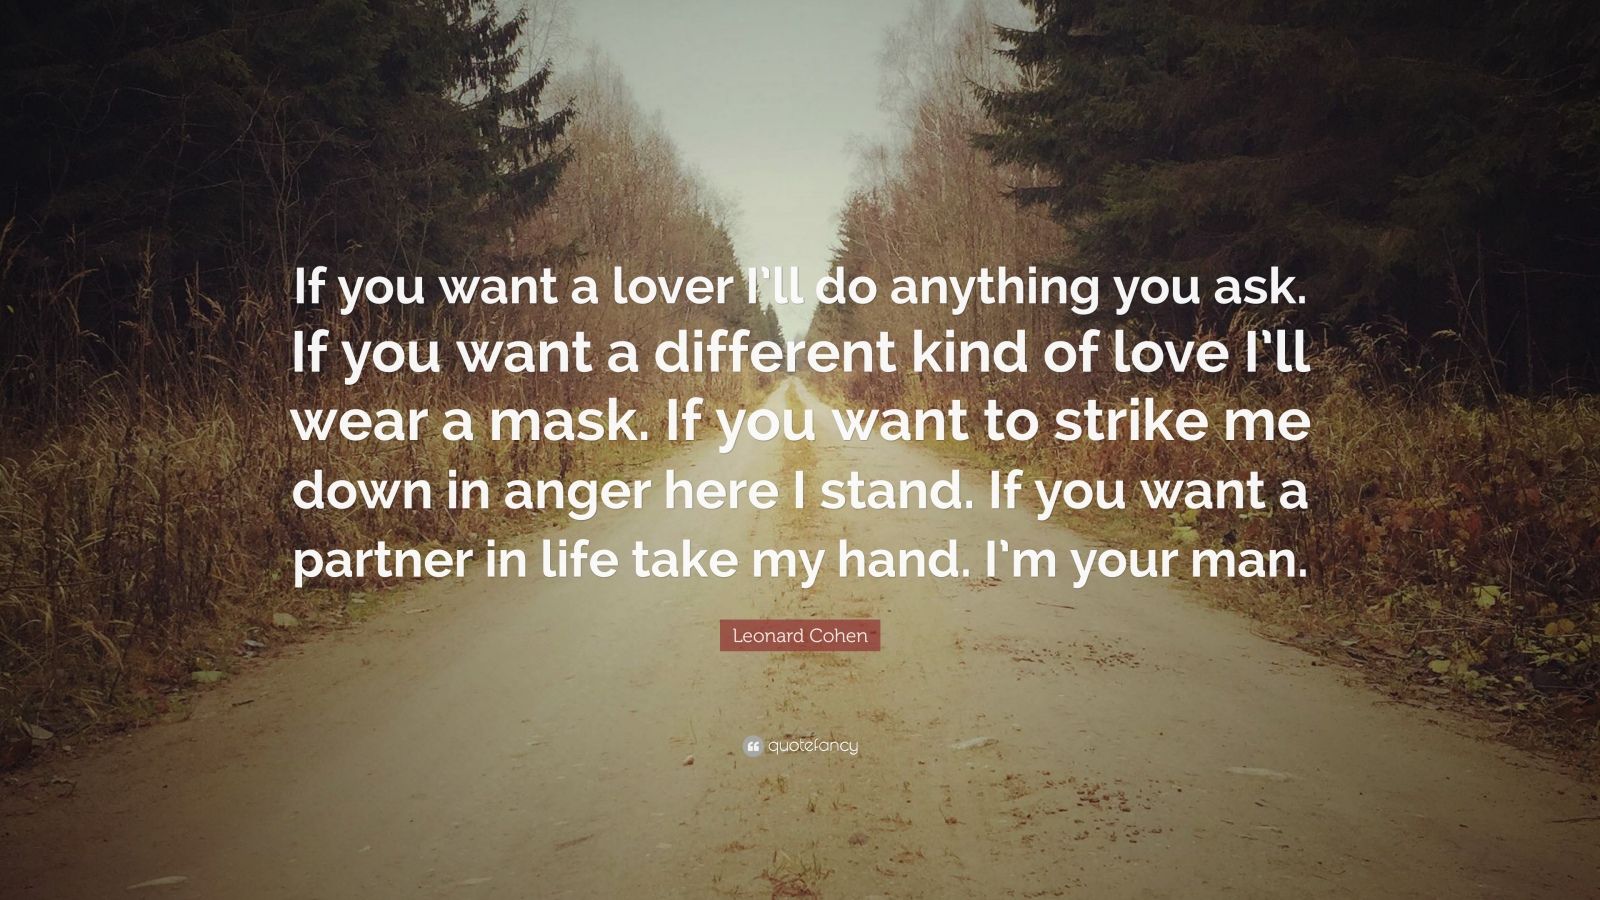 Leonard Cohen Quote If you want a lover I ll do anything 